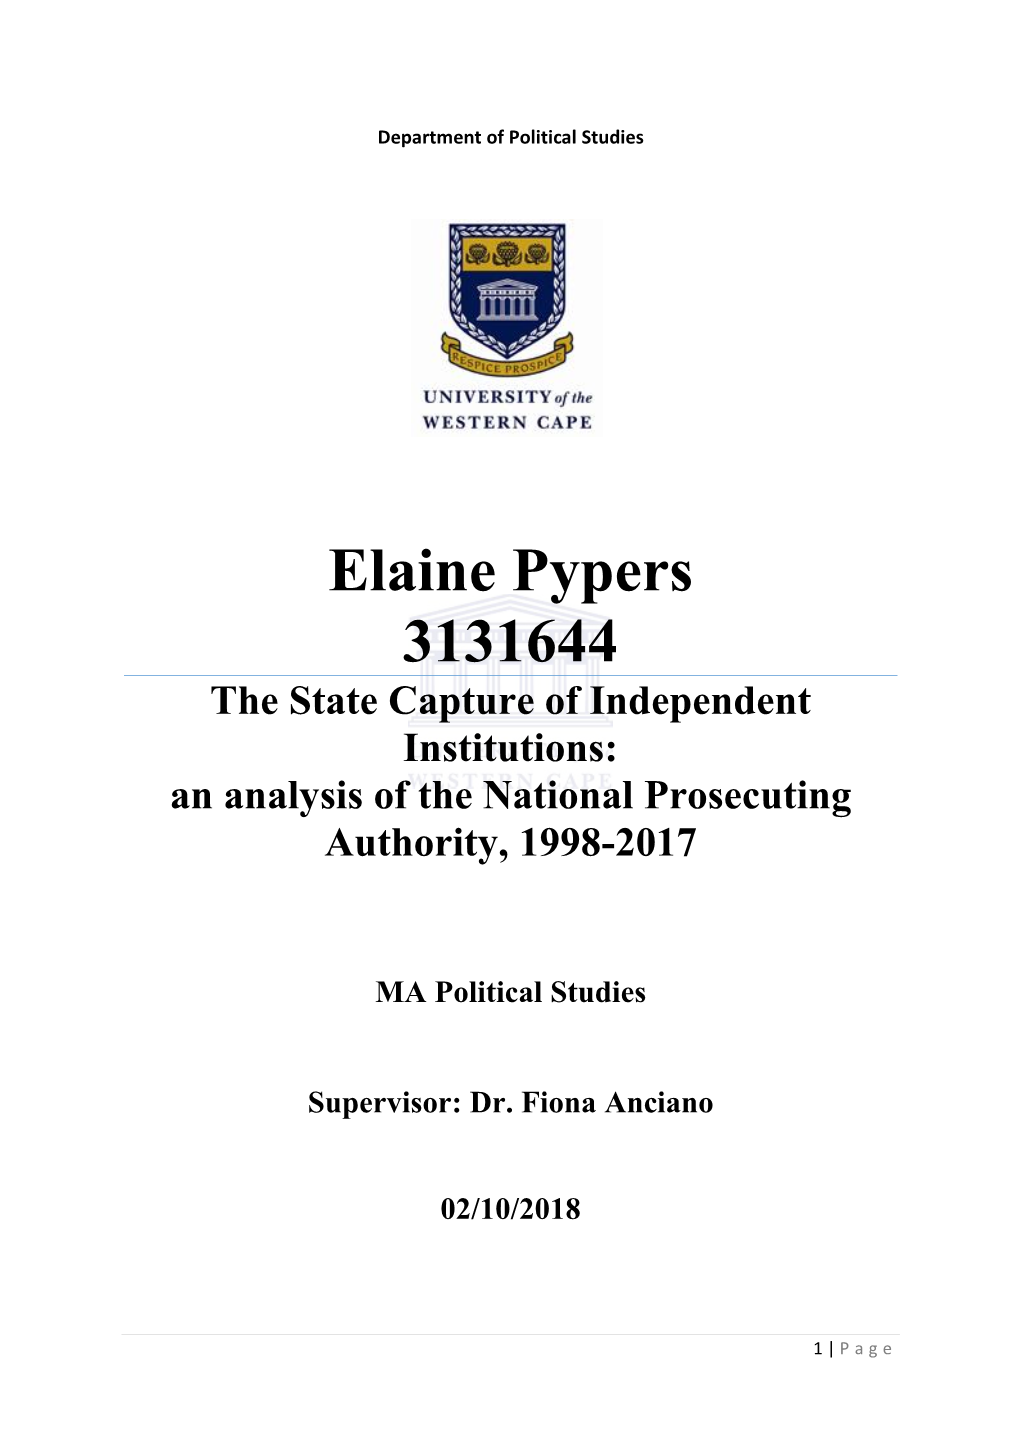 Elaine Pypers 3131644 the State Capture of Independent Institutions: an Analysis of the National Prosecuting Authority, 1998-2017